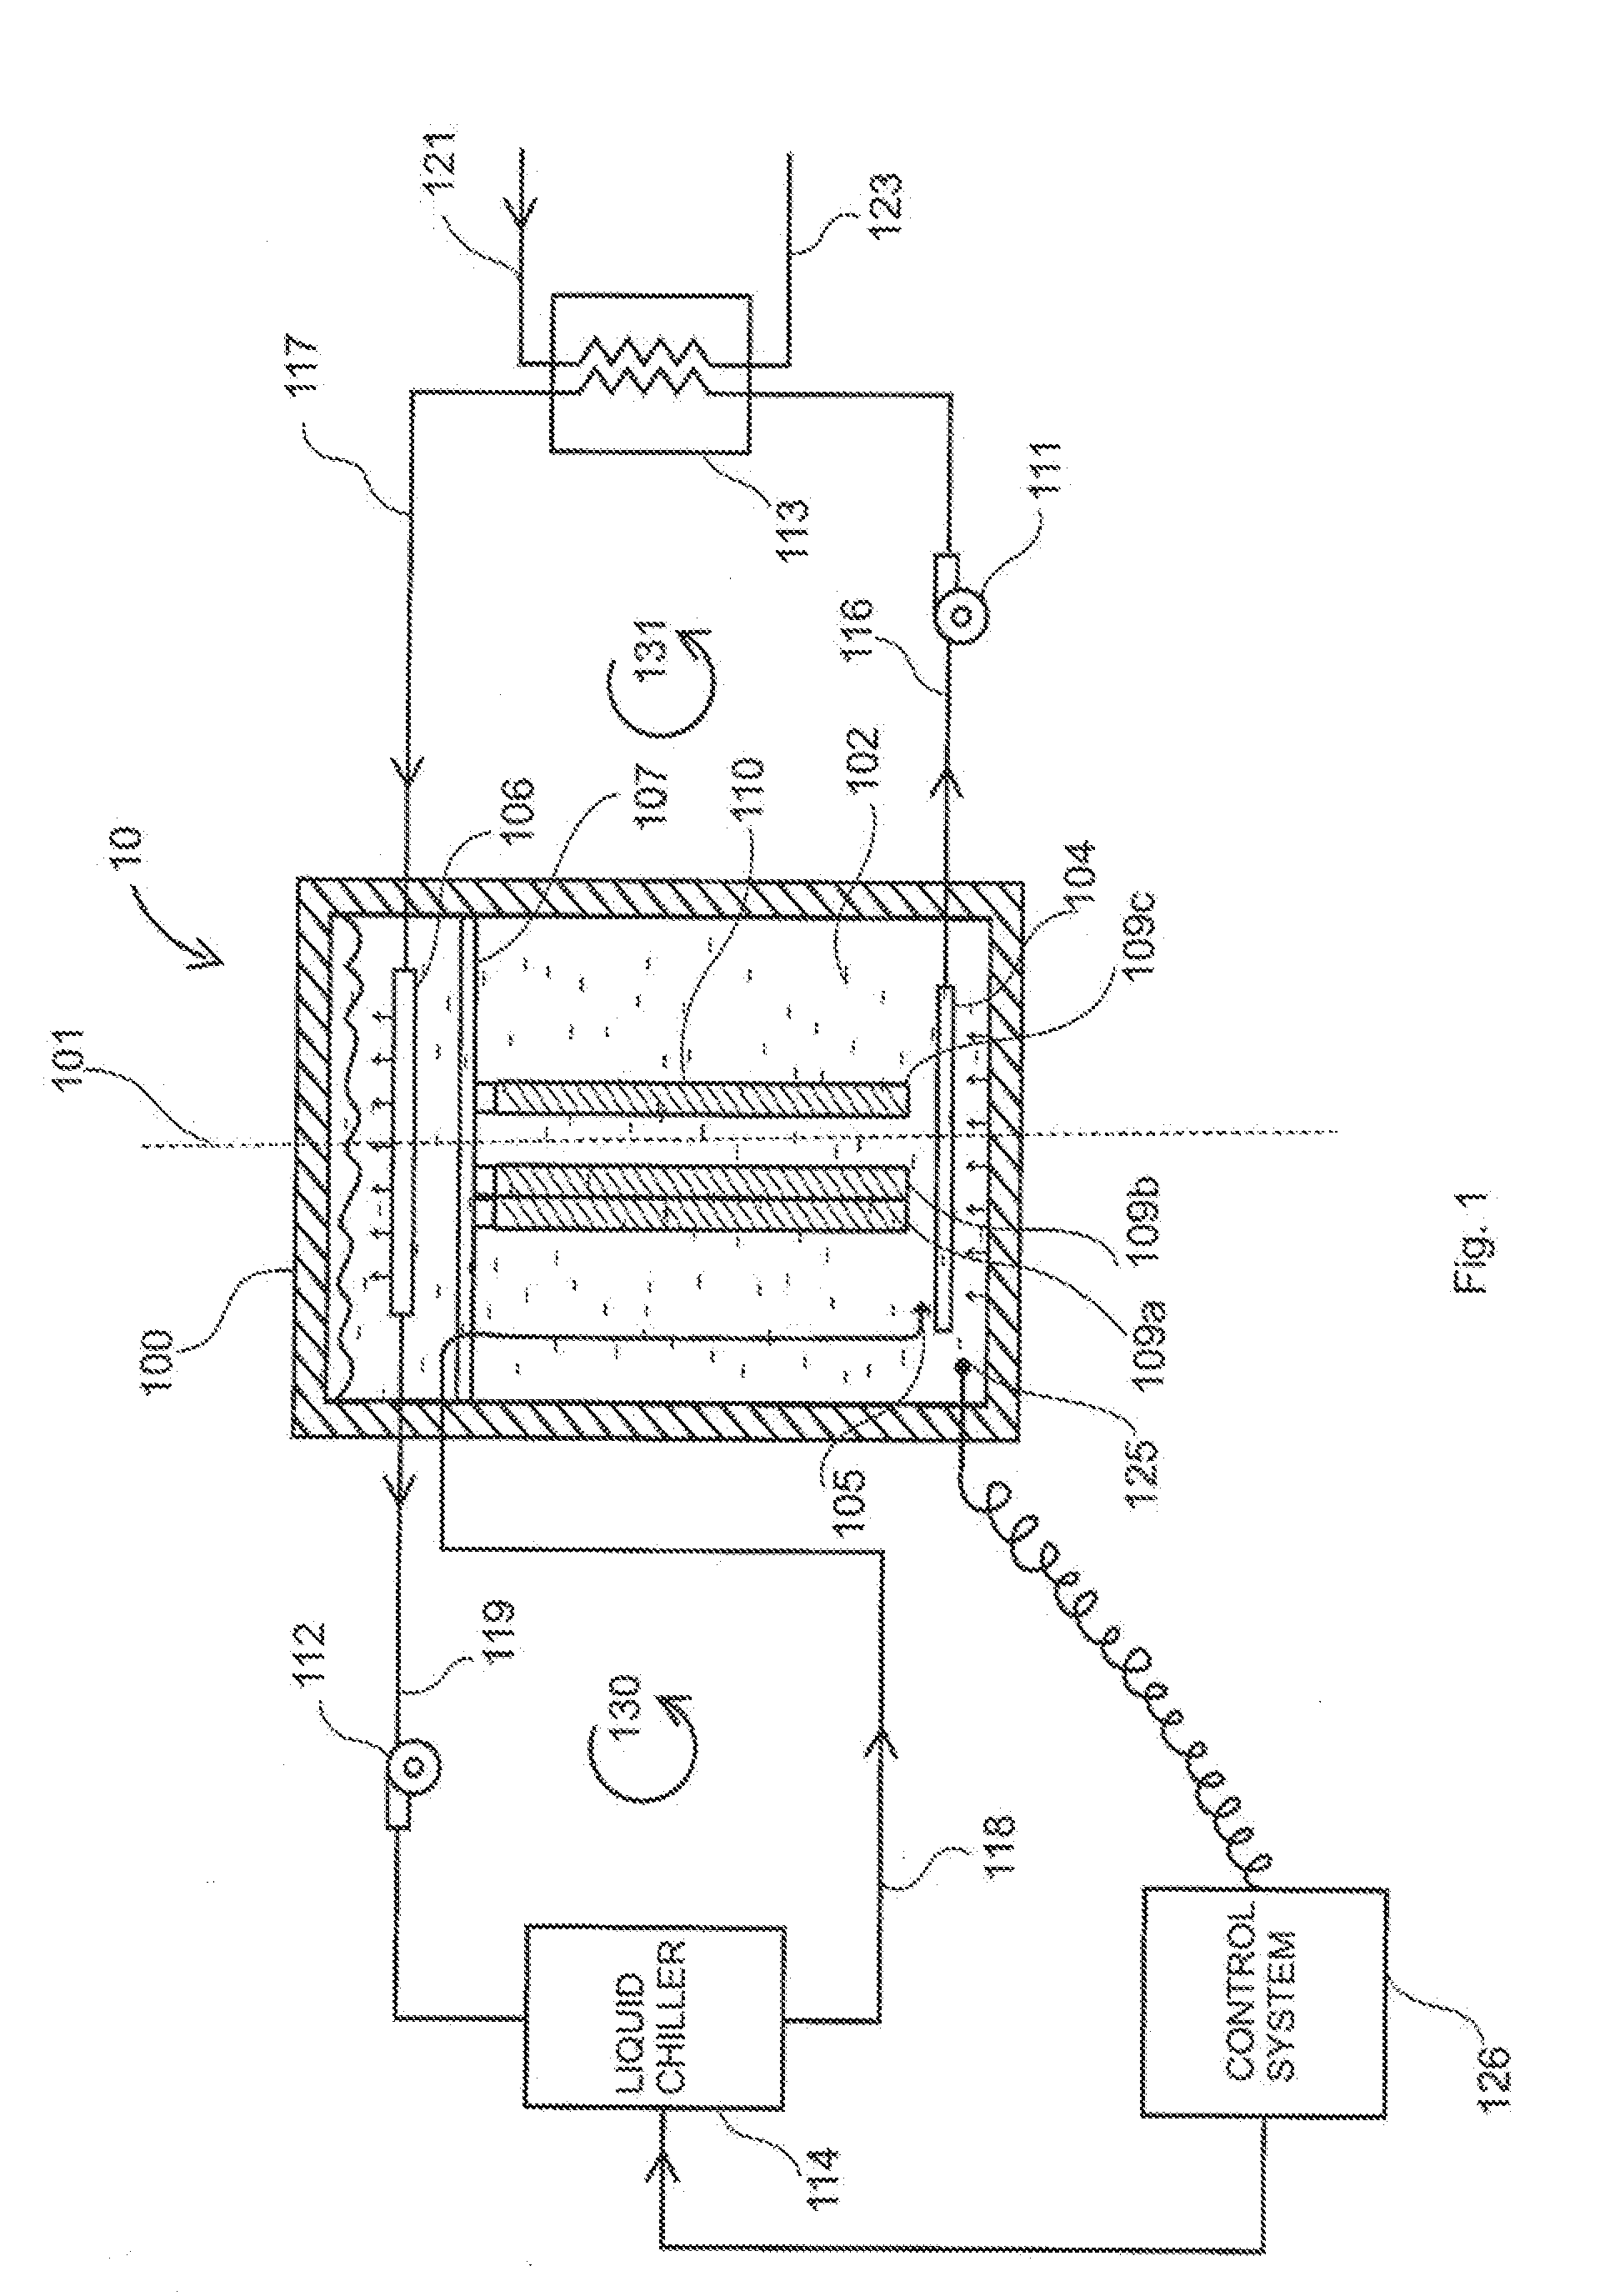 Thermal energy battery with enhanced heat exchange capability and modularity